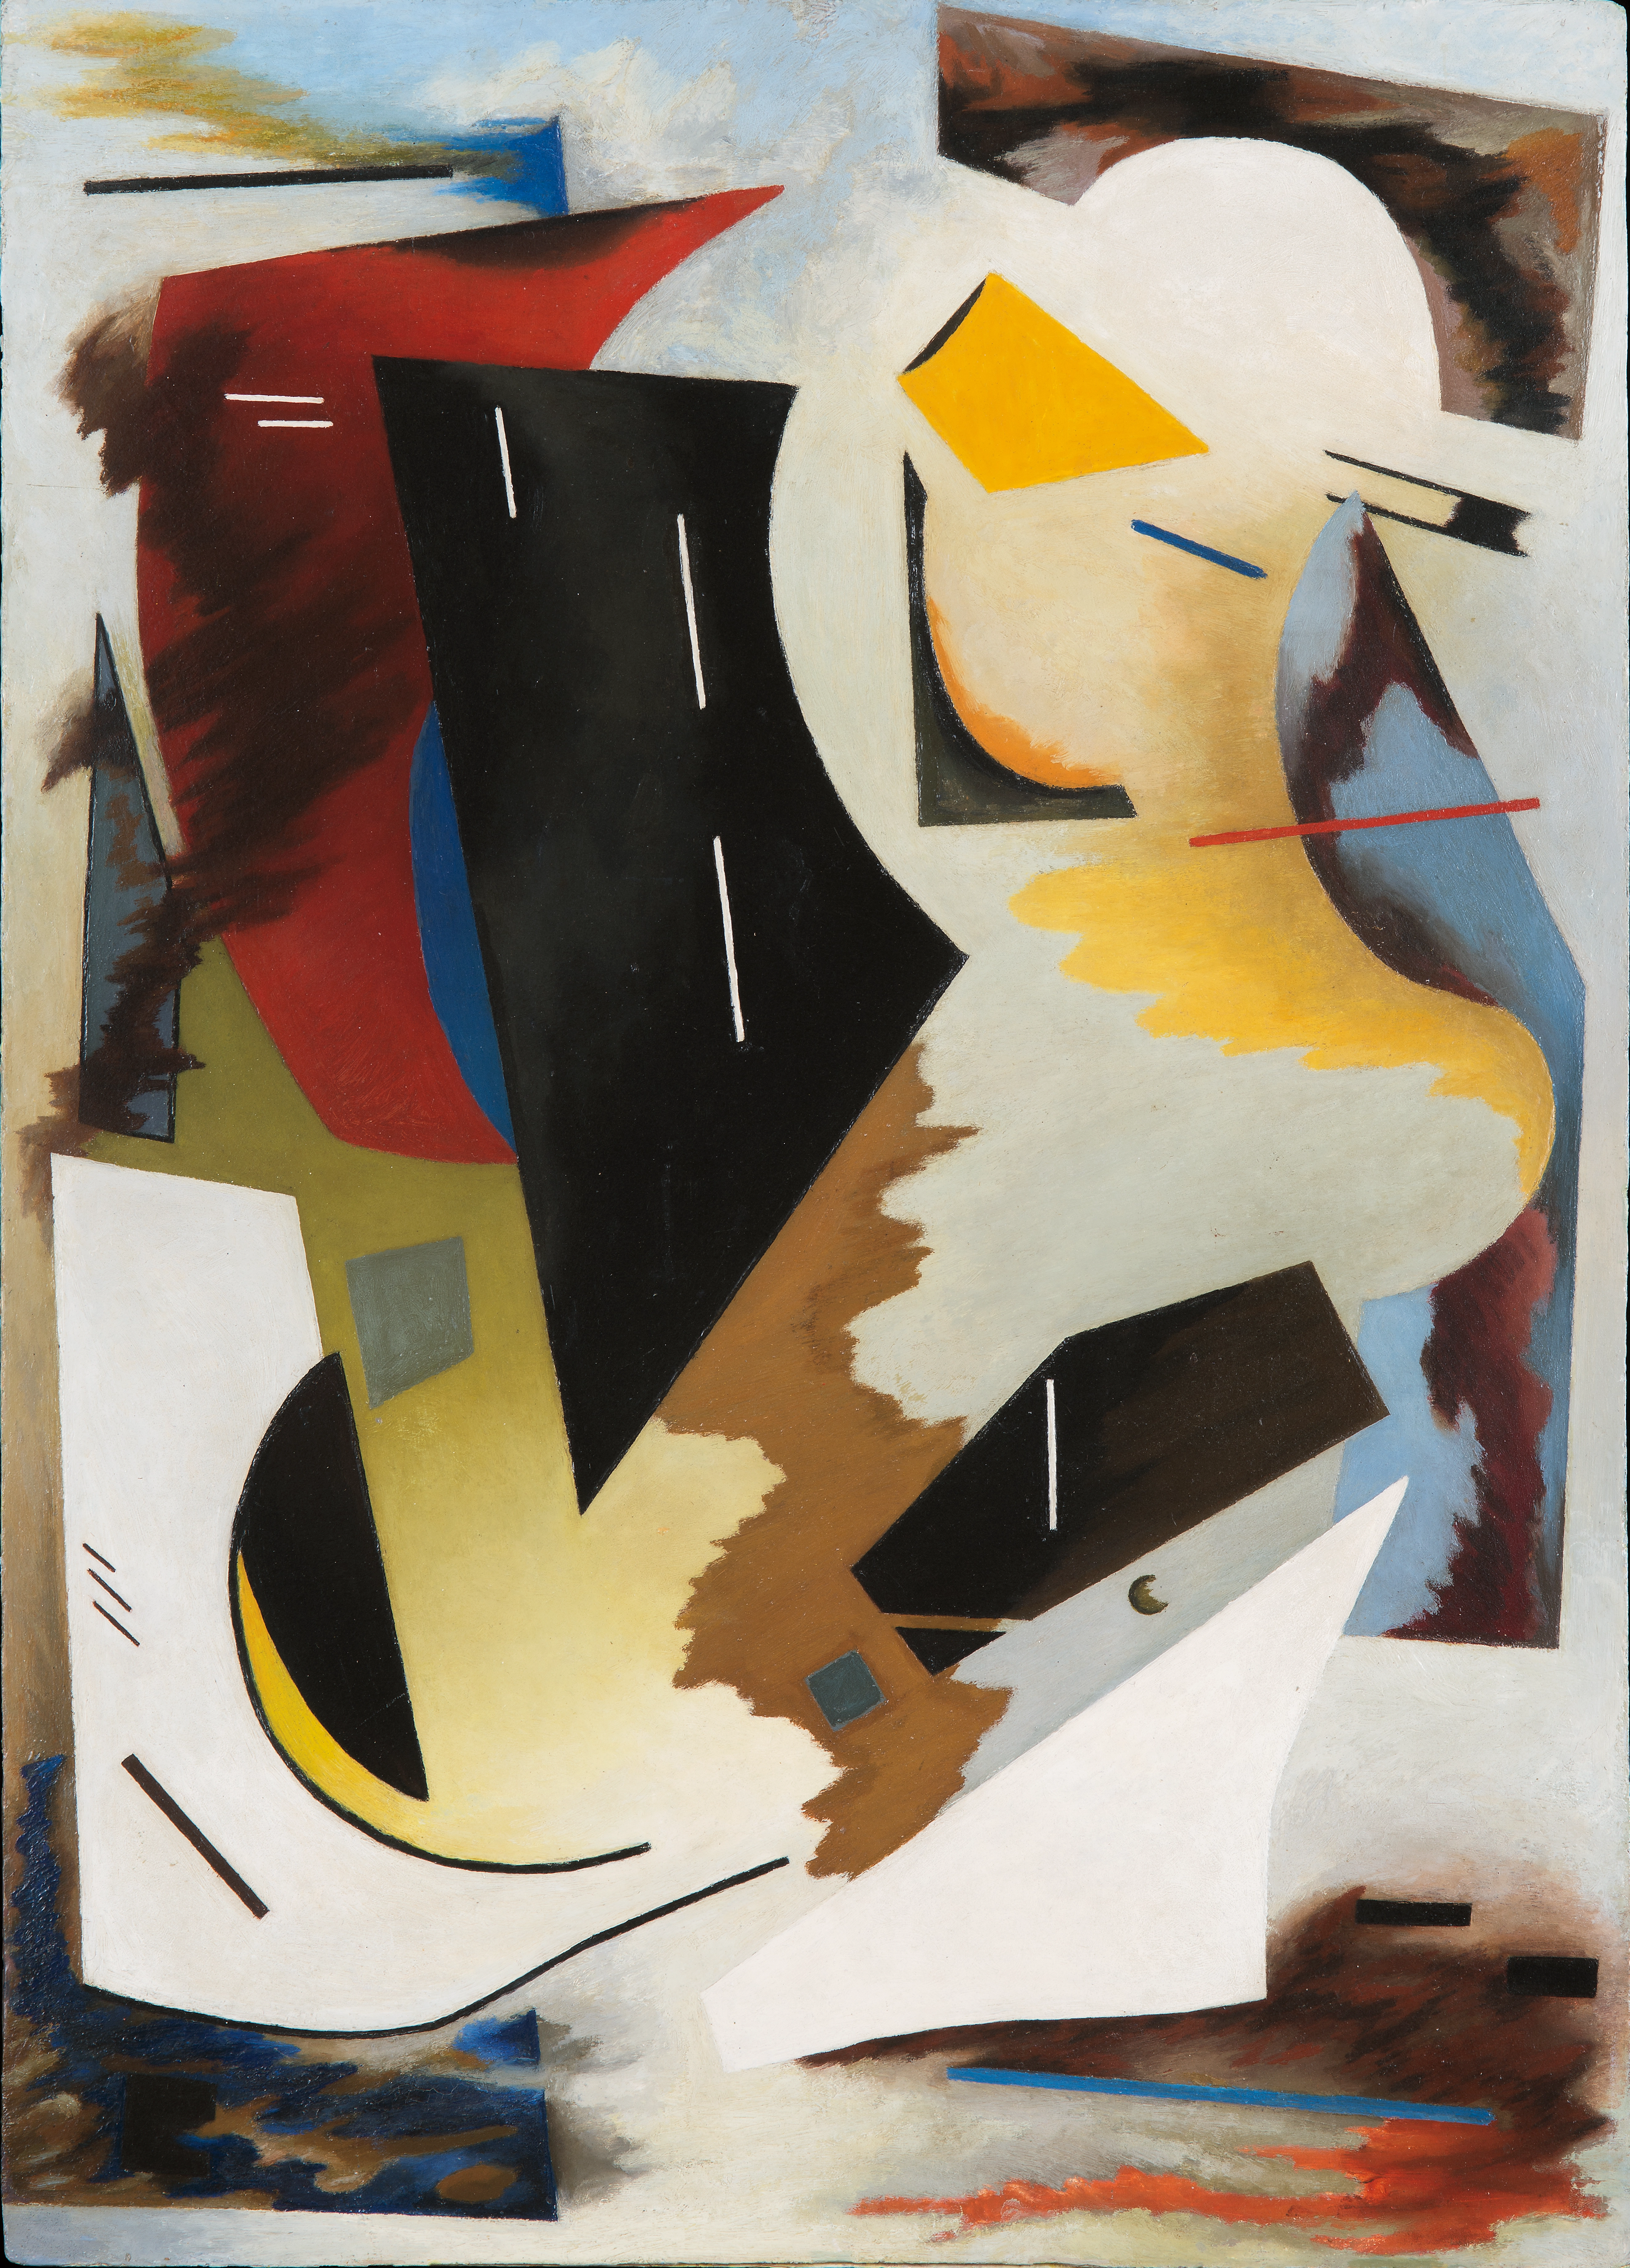 Abstract oil on canvas painting comprised of geometric forms, set among biomorphic shapes with undefined borders. The colors contained in this piece include black, white, yellow, red, blue, and varying browns.